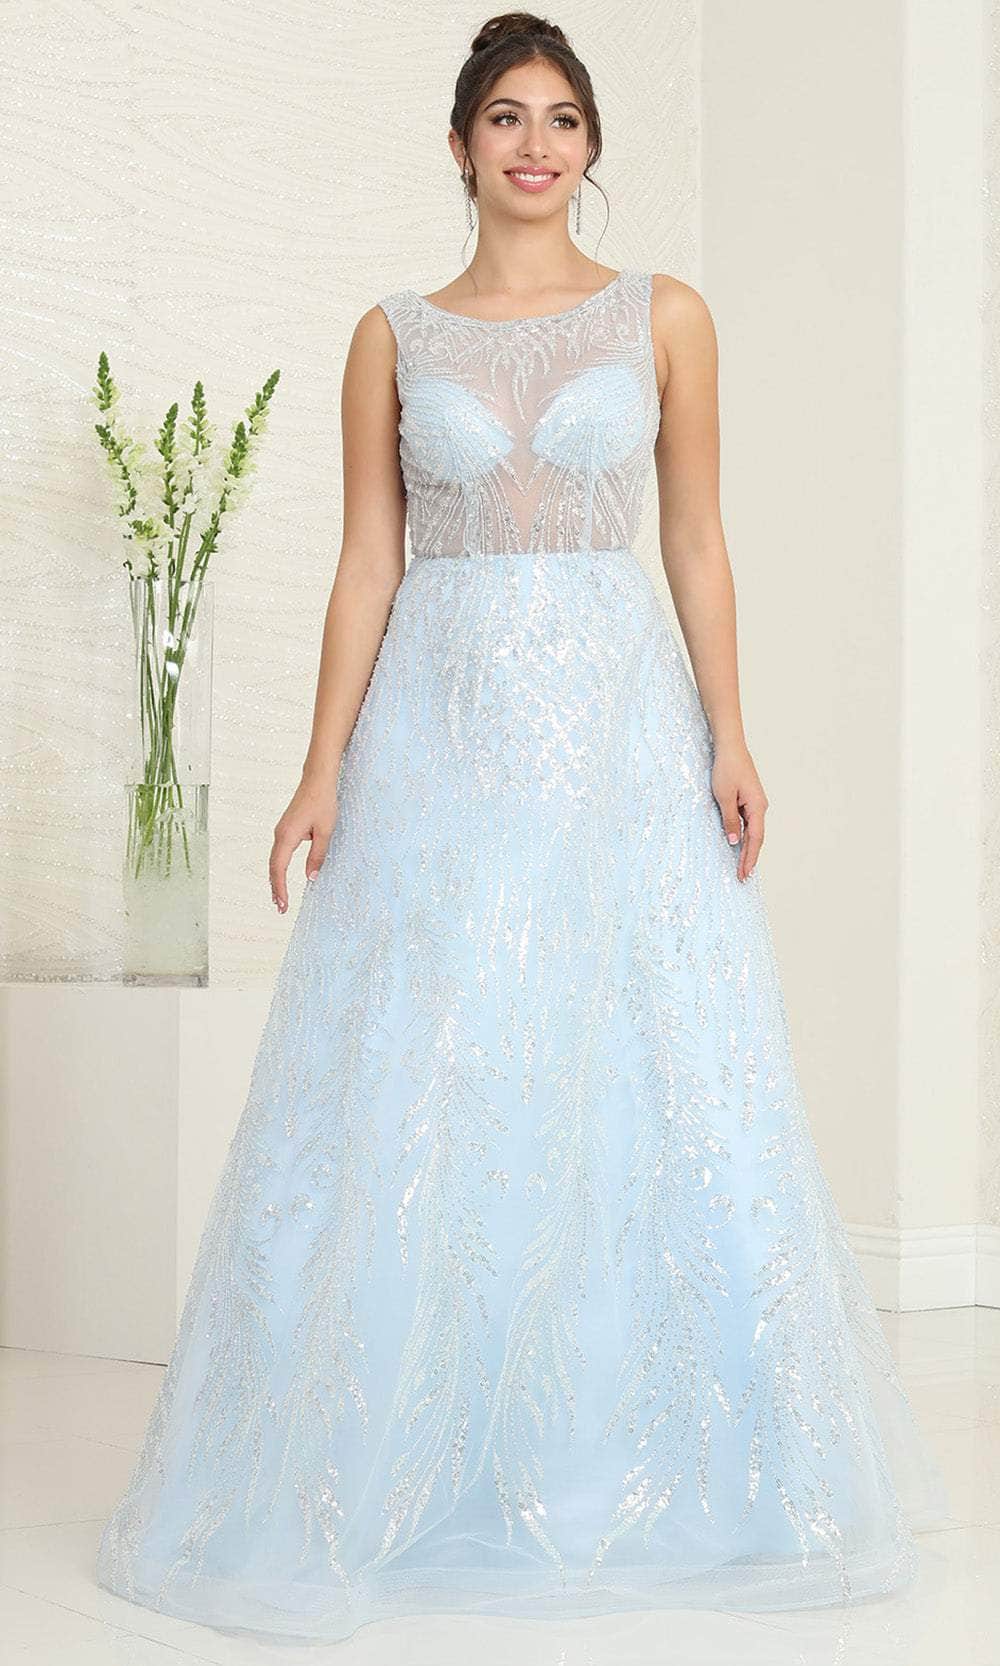 Image of May Queen RQ8081 - Illusion Bodice Scoop Prom Gown